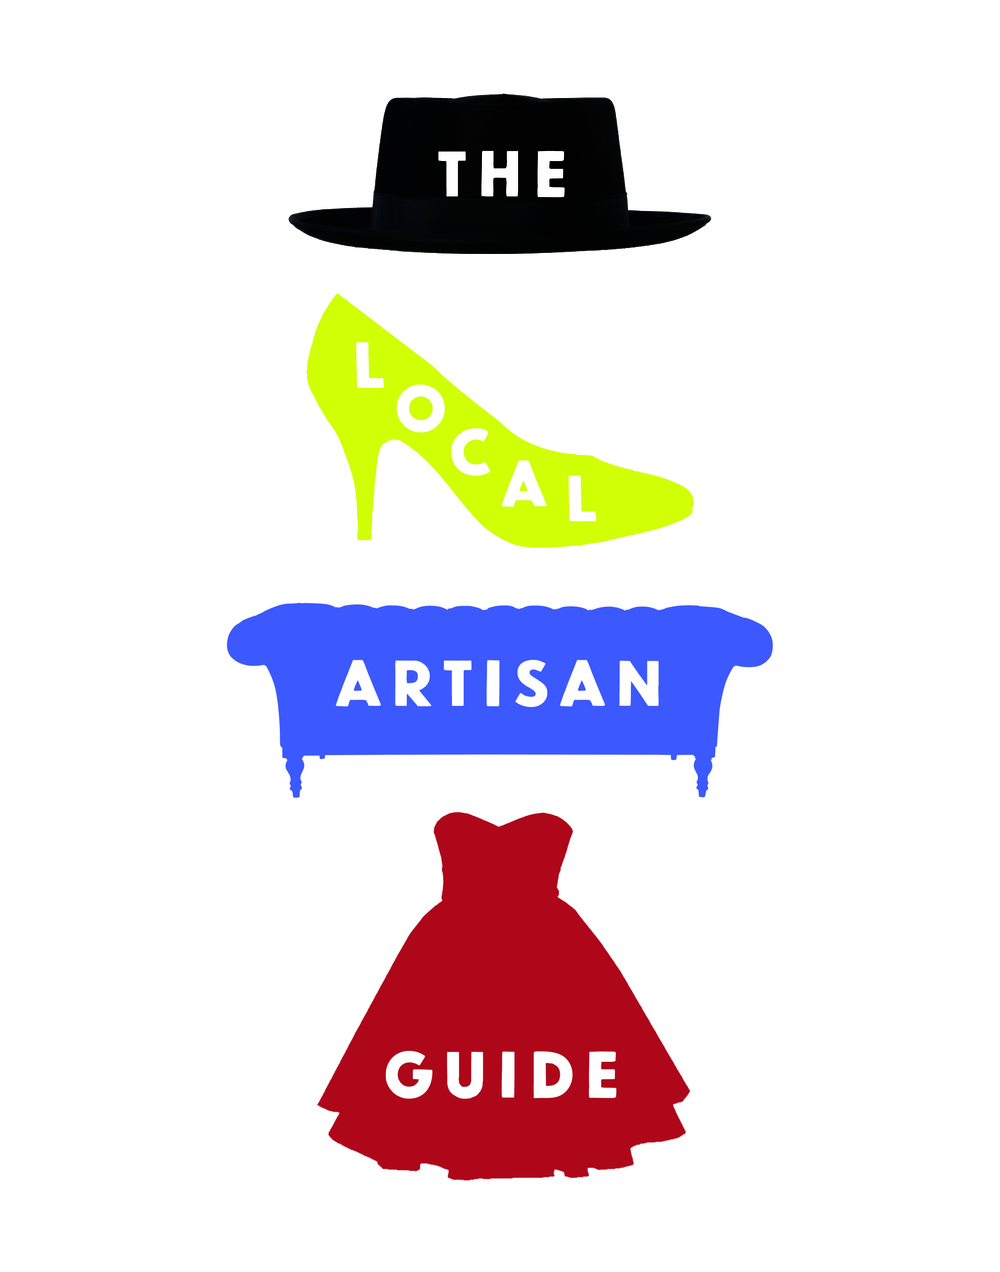 The Local Artisan Guide